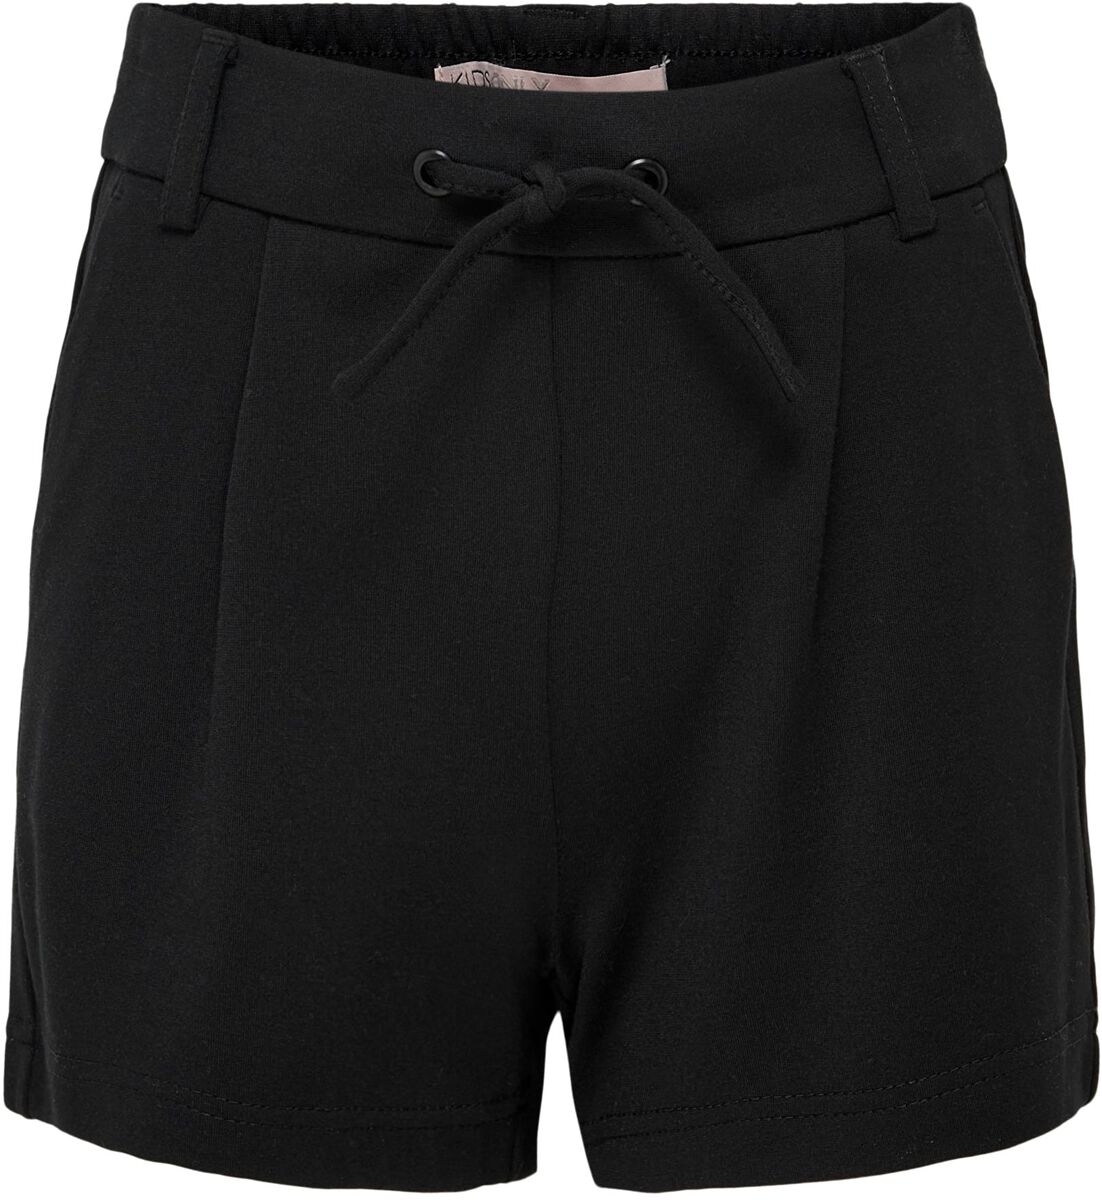 Image of Shorts di Kids Only - Kogpoptrash easy shorts NOOS - 140 a 164 - ragazze - nero